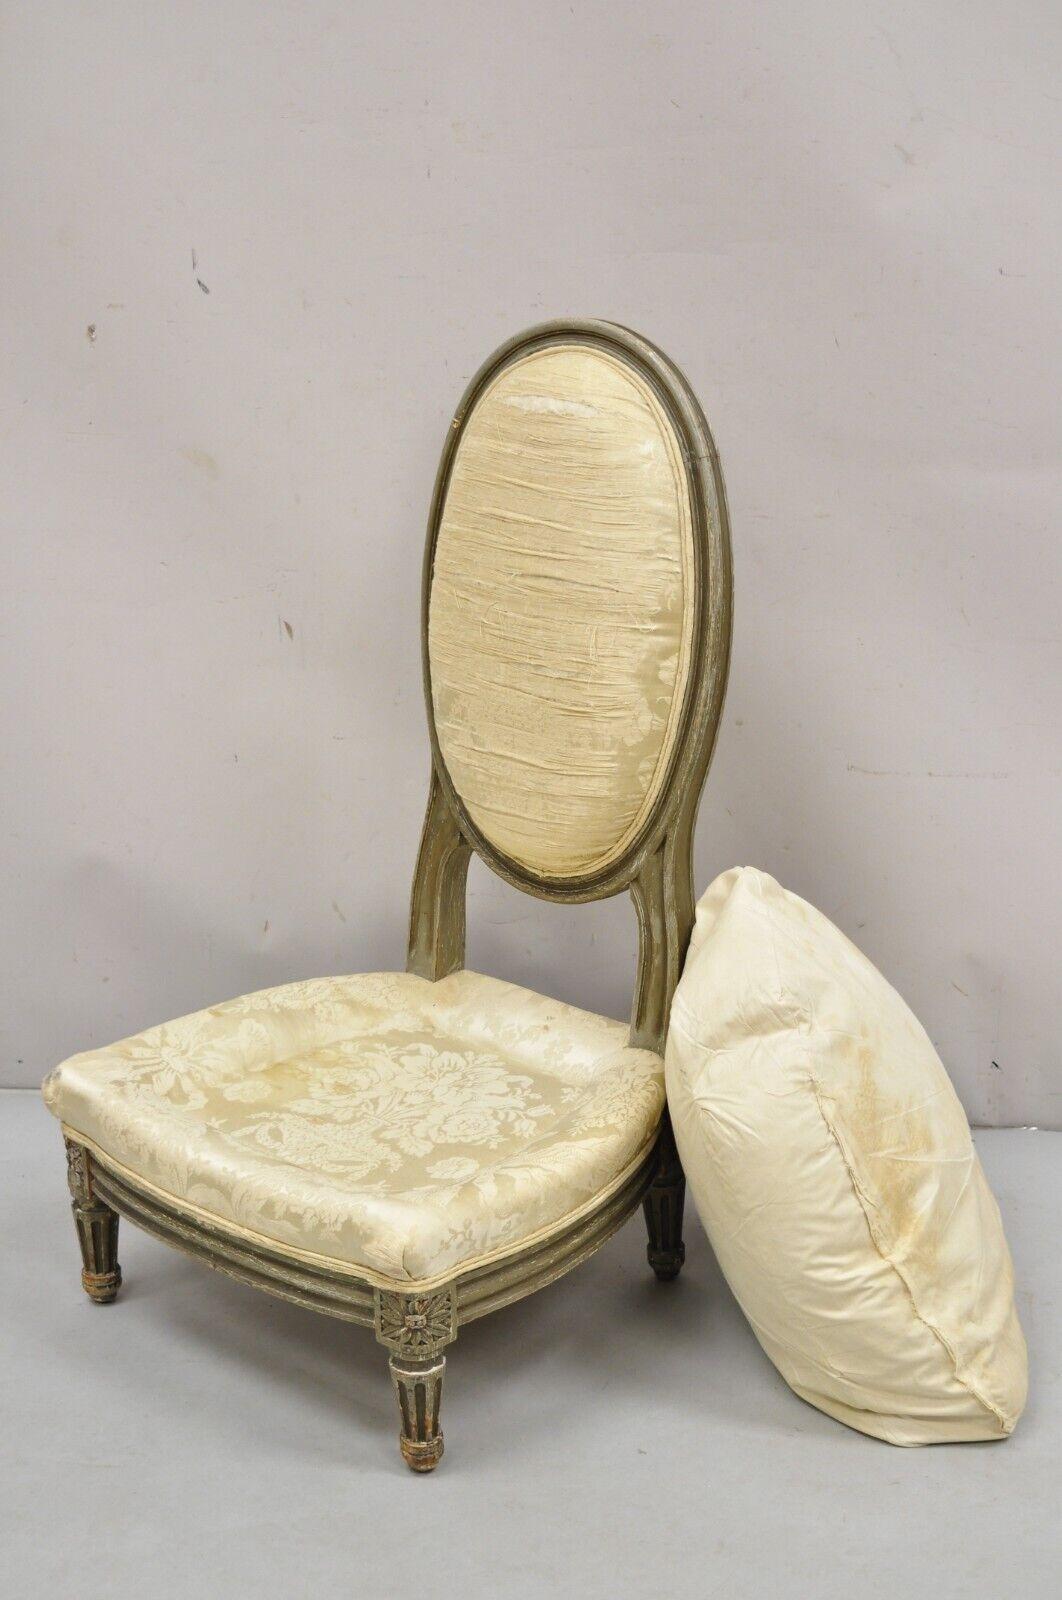 Antique French Louis XVI Style Distress Painted Boudoir Slipper Low Chair In Good Condition For Sale In Philadelphia, PA